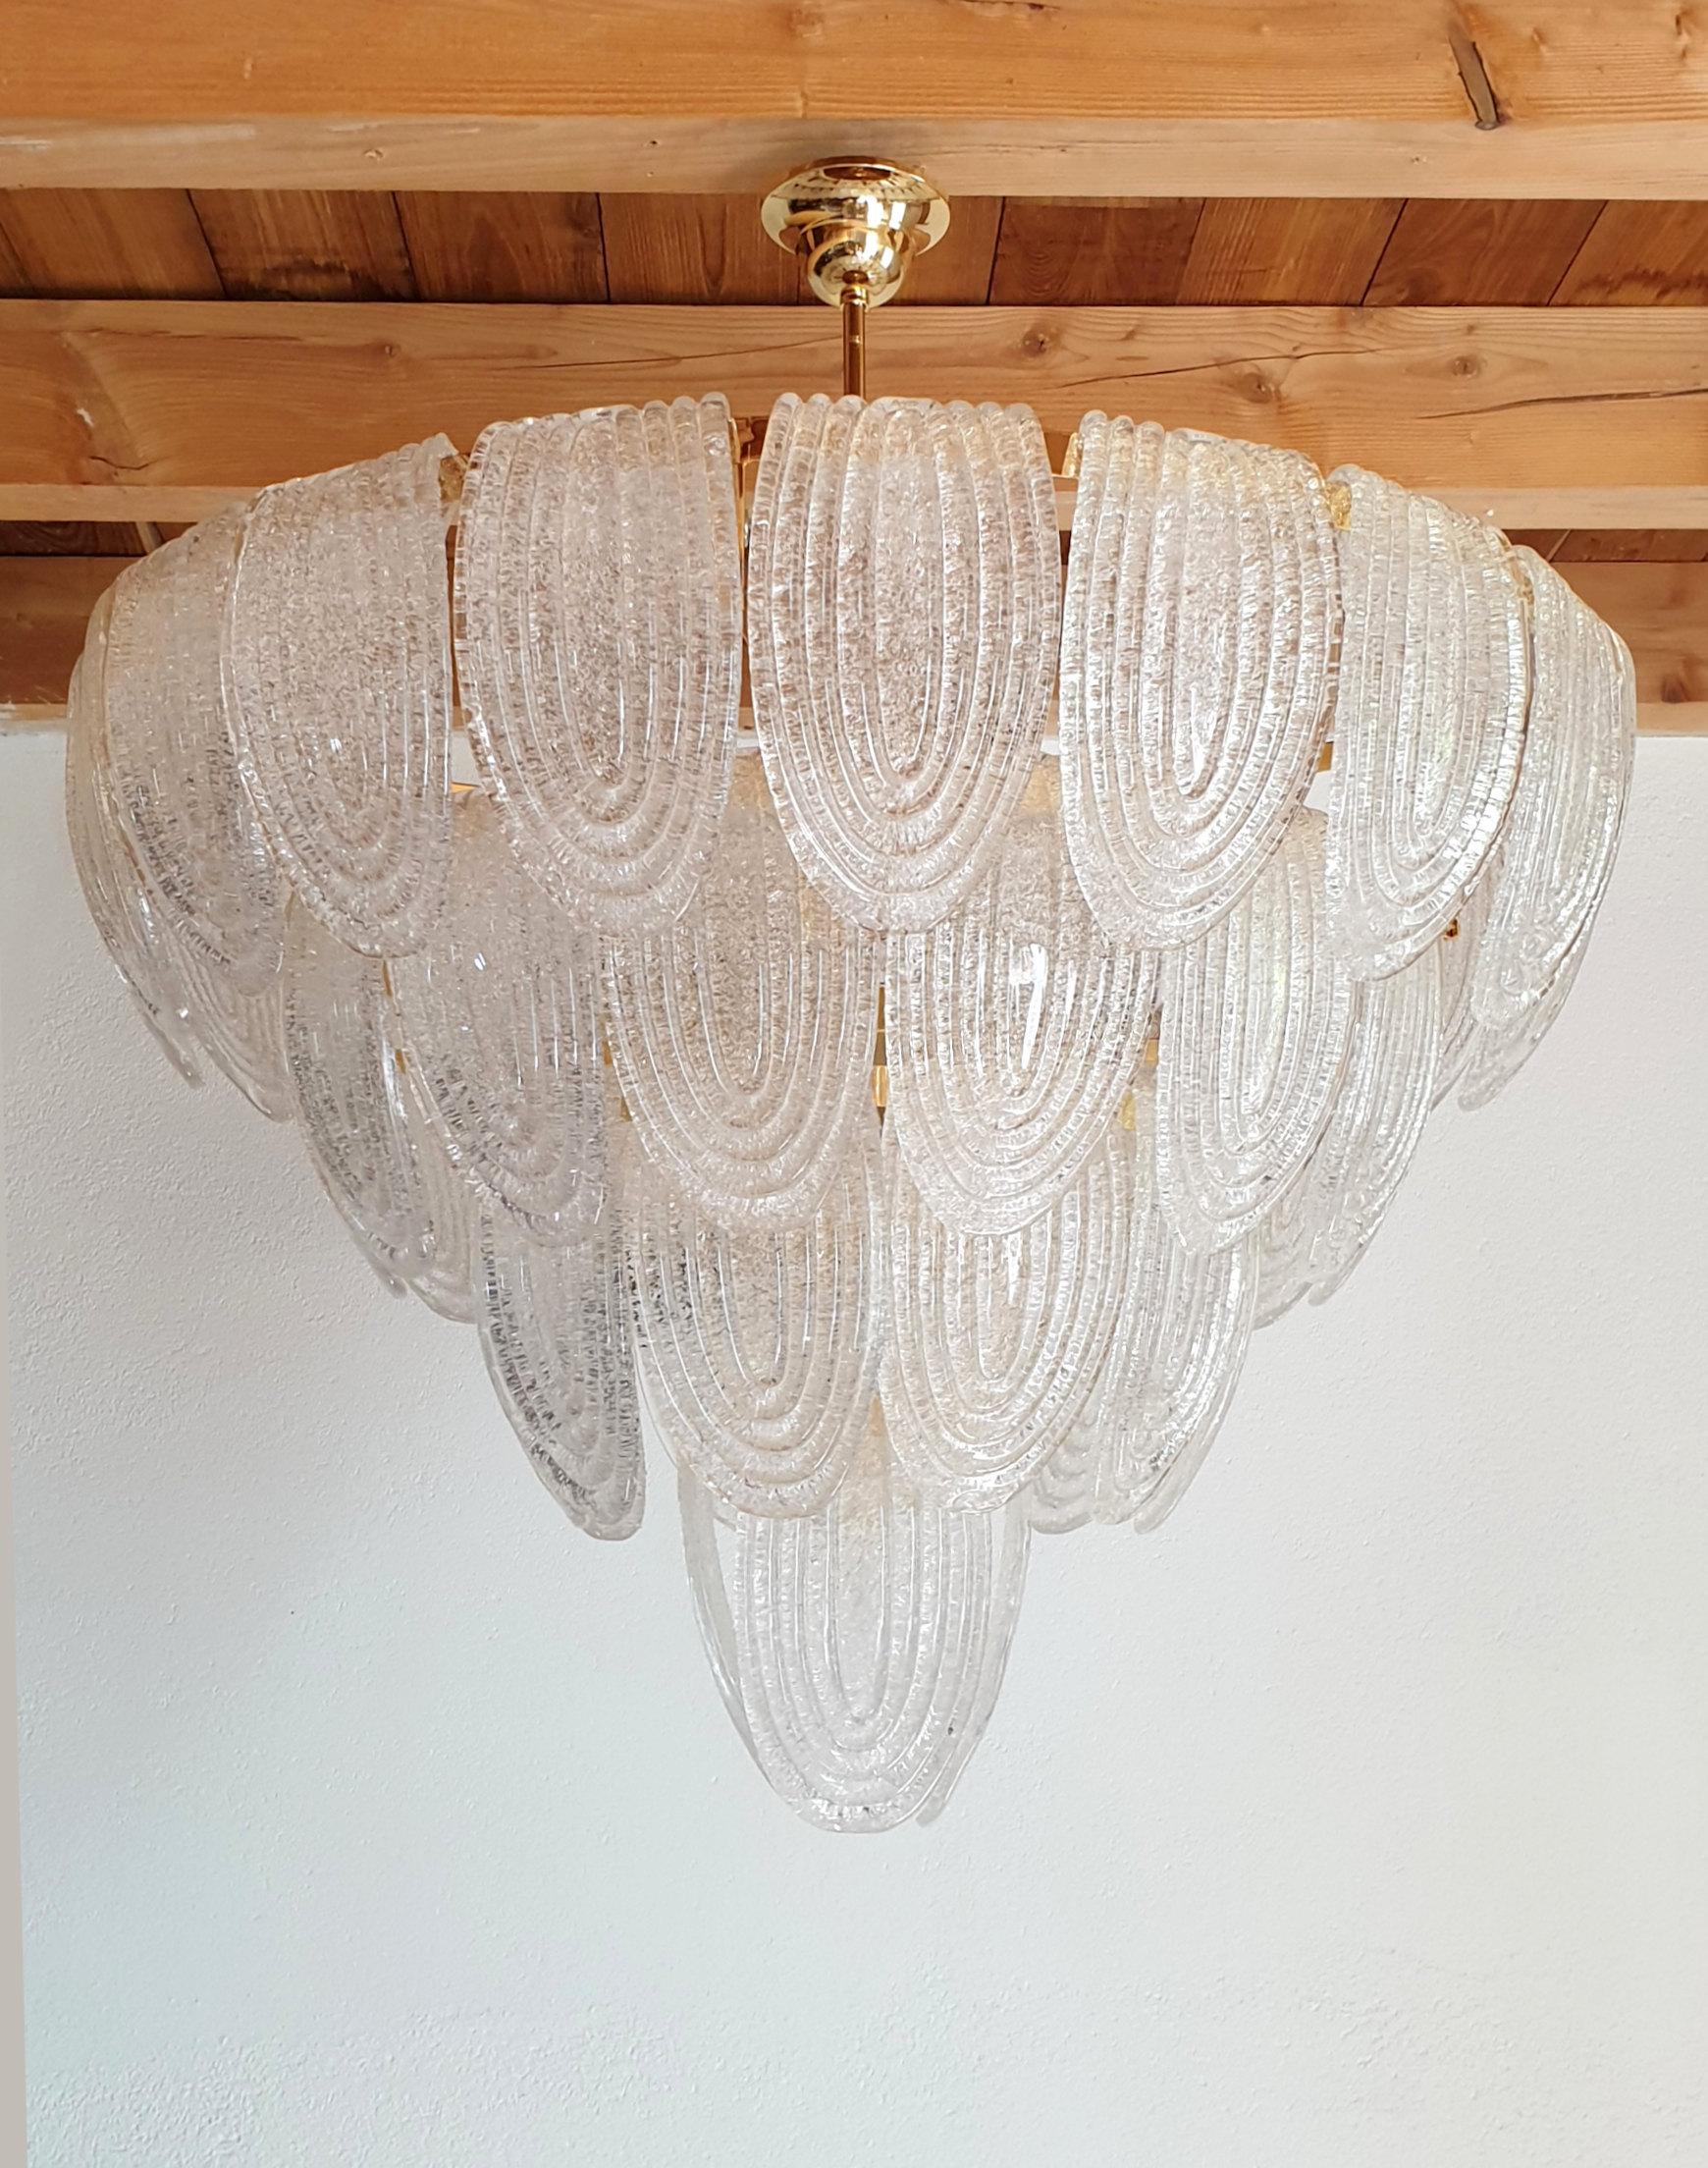 Large Mid-Century Modern translucent and textured Murano glass chandelier, with gold plated frame & chain.
Can be hanged as flush mount fixture, or as a chandelier, with a central stem and canopy H 13 in.
Height glass chandelier only: 23.23